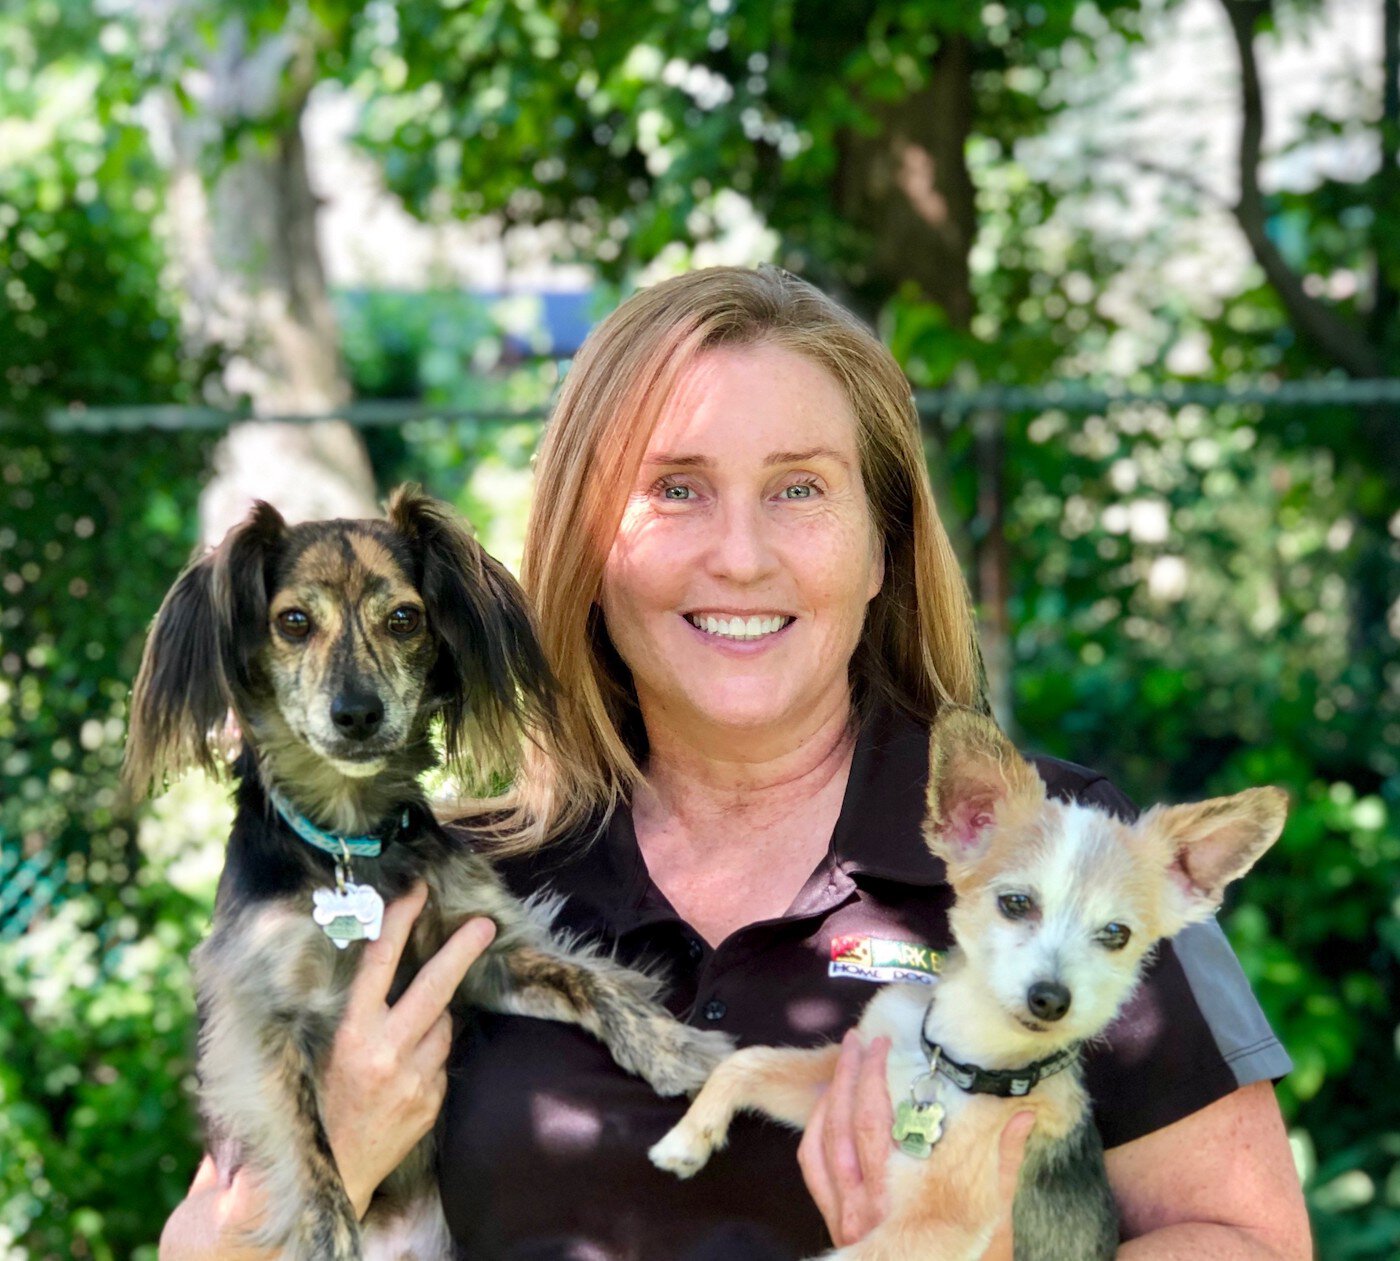 Bark Busters dog trainer smiling with 2 dogs